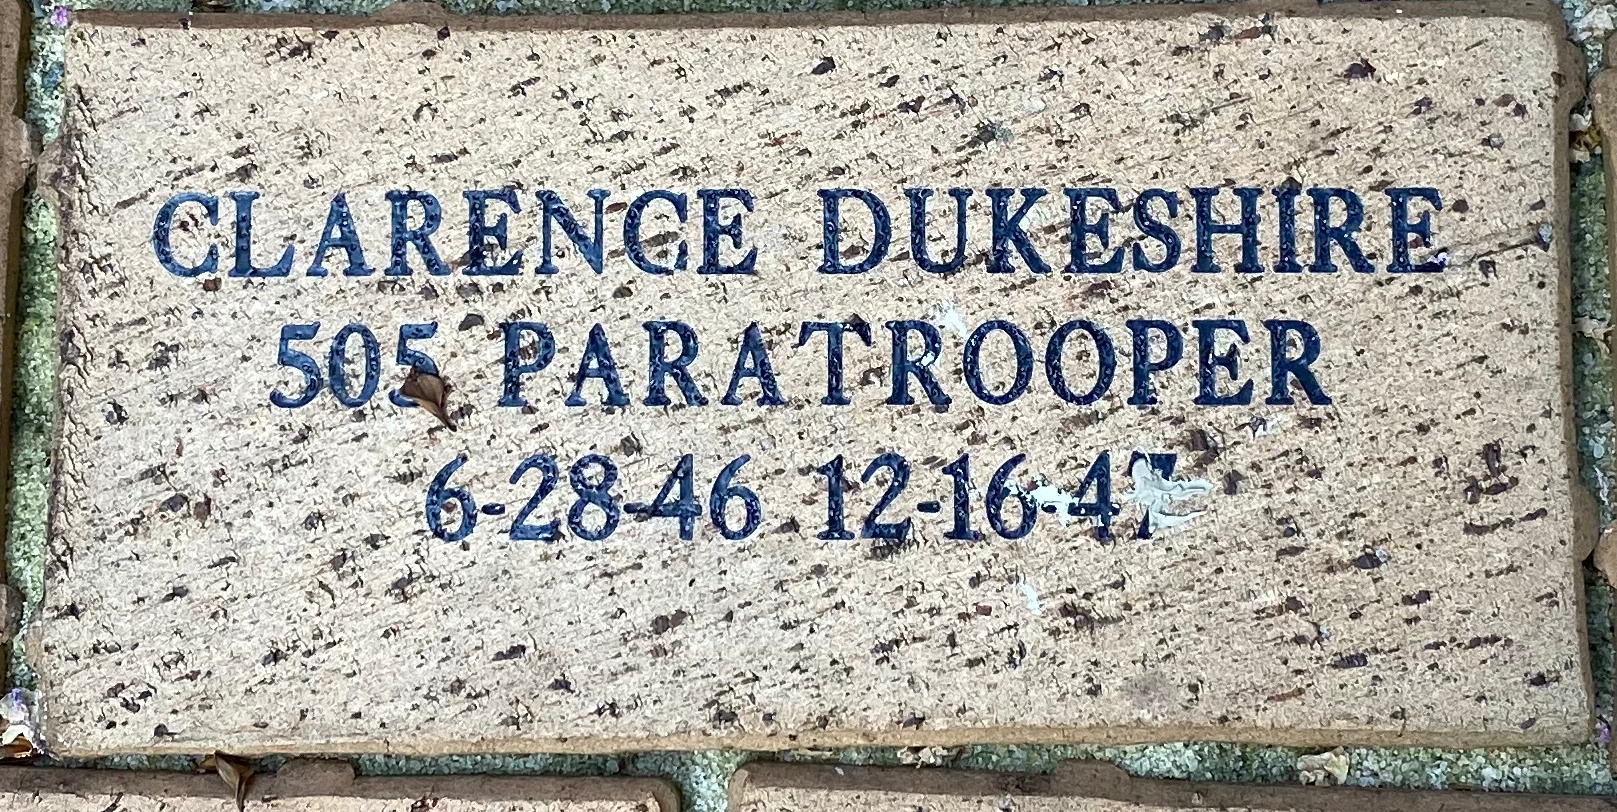 CLARENCE DUKESHIRE 505 PARATROOPER 6-28-1946-12-16-1947